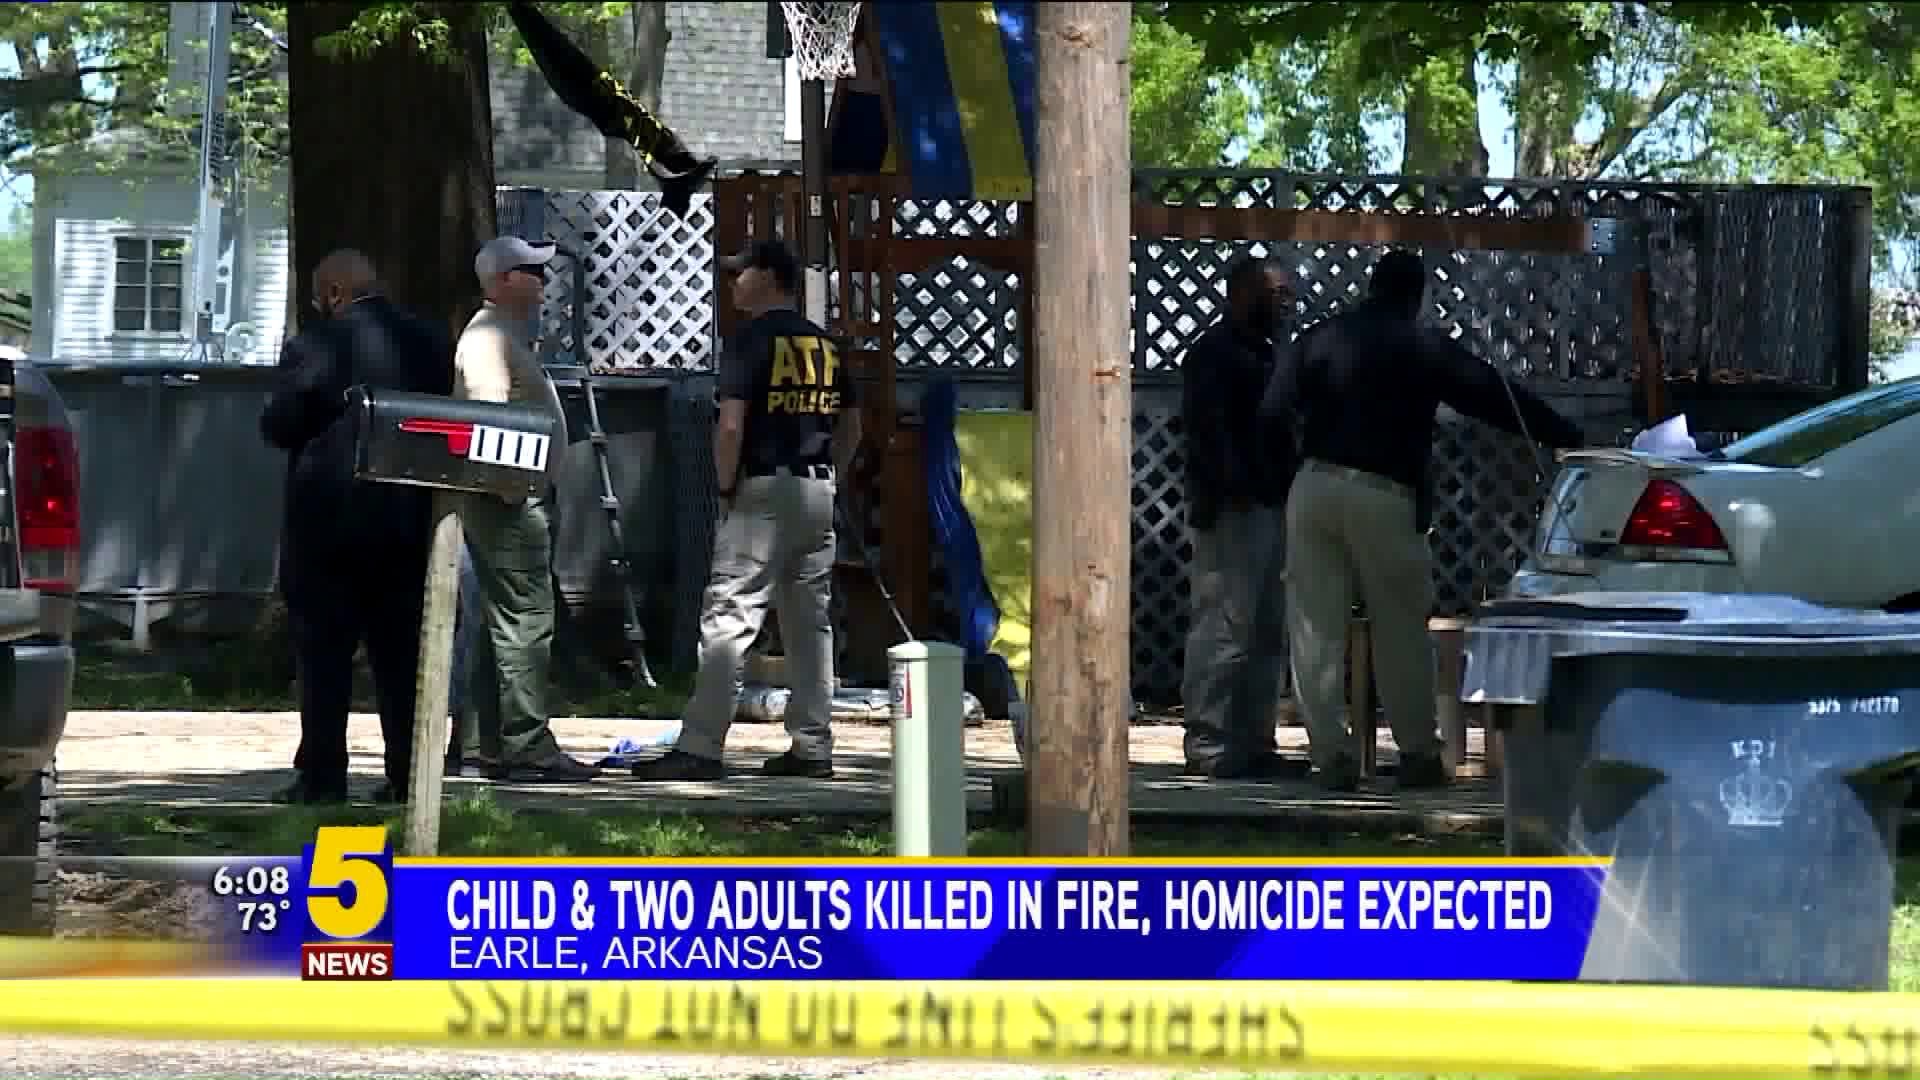 Child and Two Adults Killed in Fire, Homicide Expected